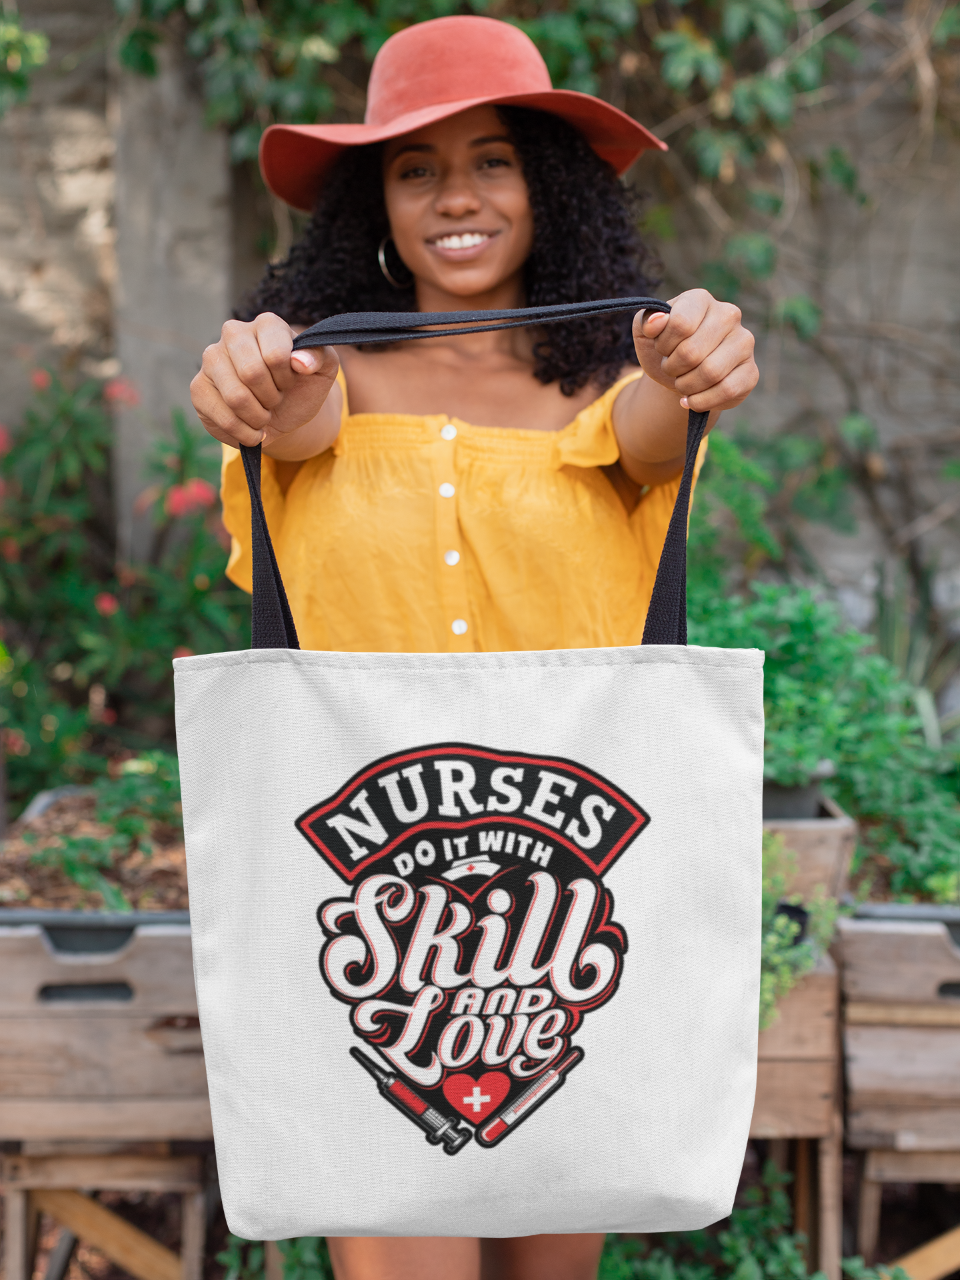 Nurses Do It With Skill And Love  - Tote Bag